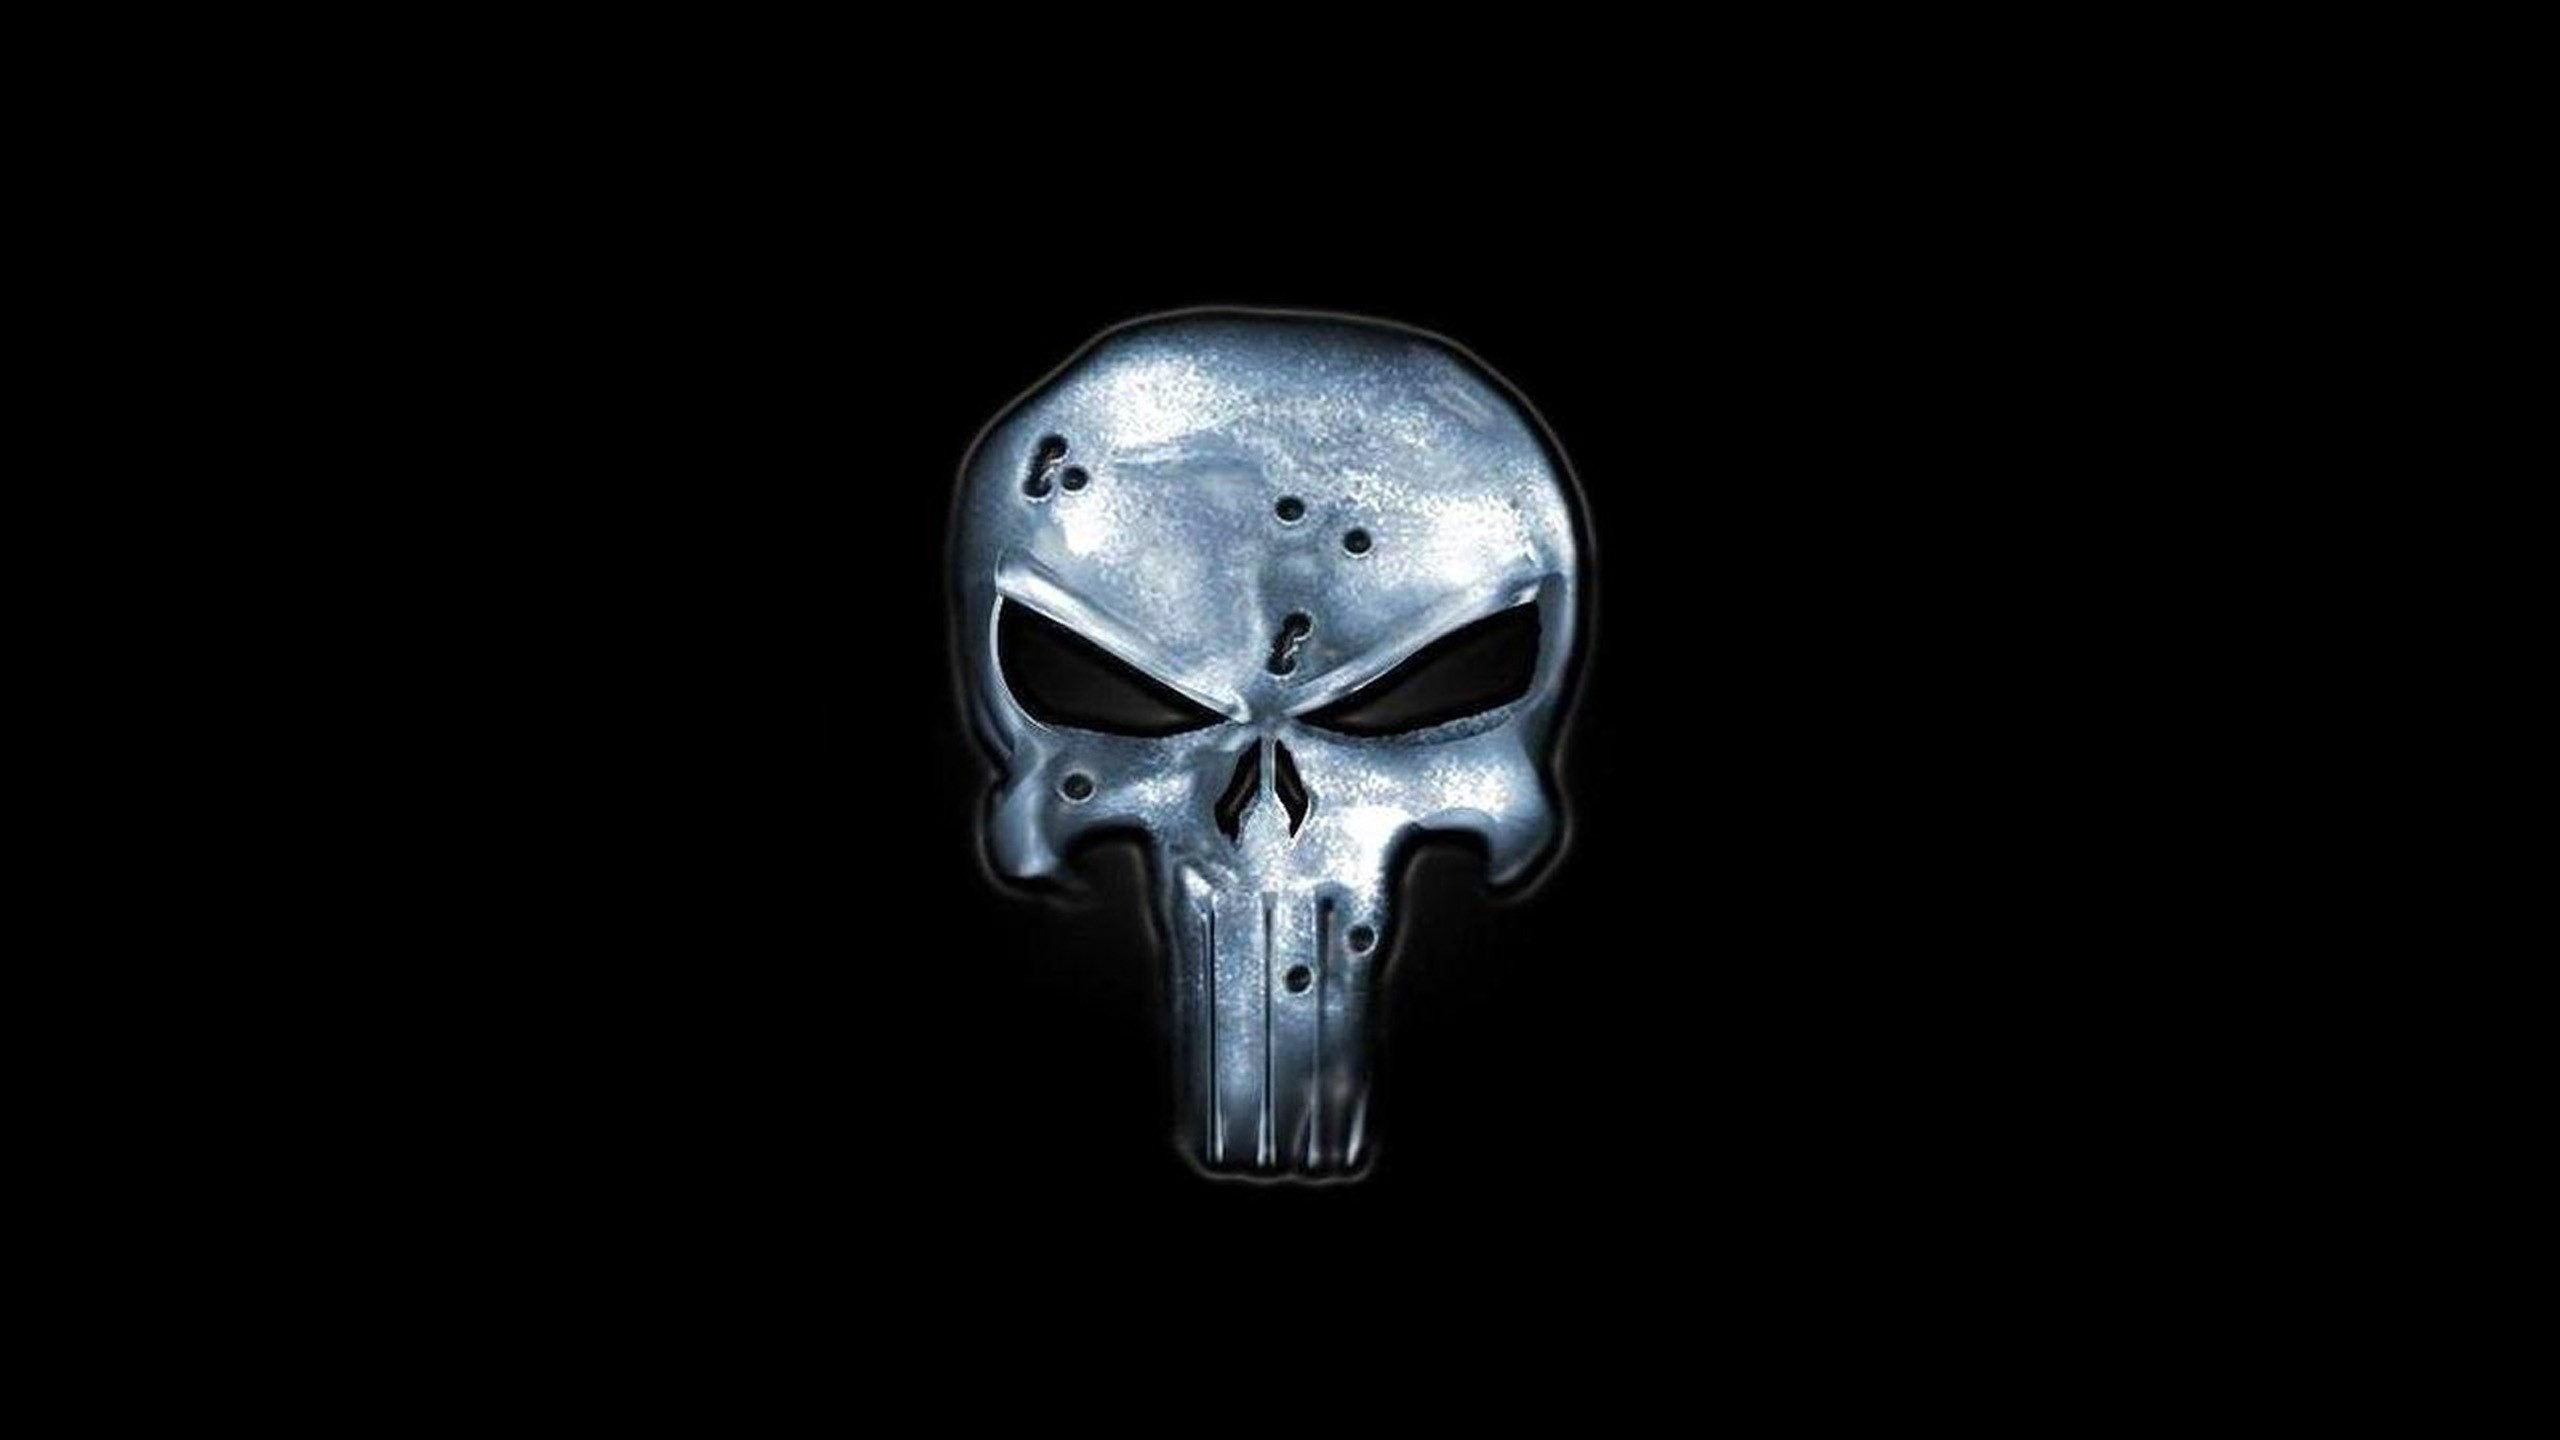 Iphone 2560x1440 High Resolution Wallpapers Widescreen The Punisher 2560x1440